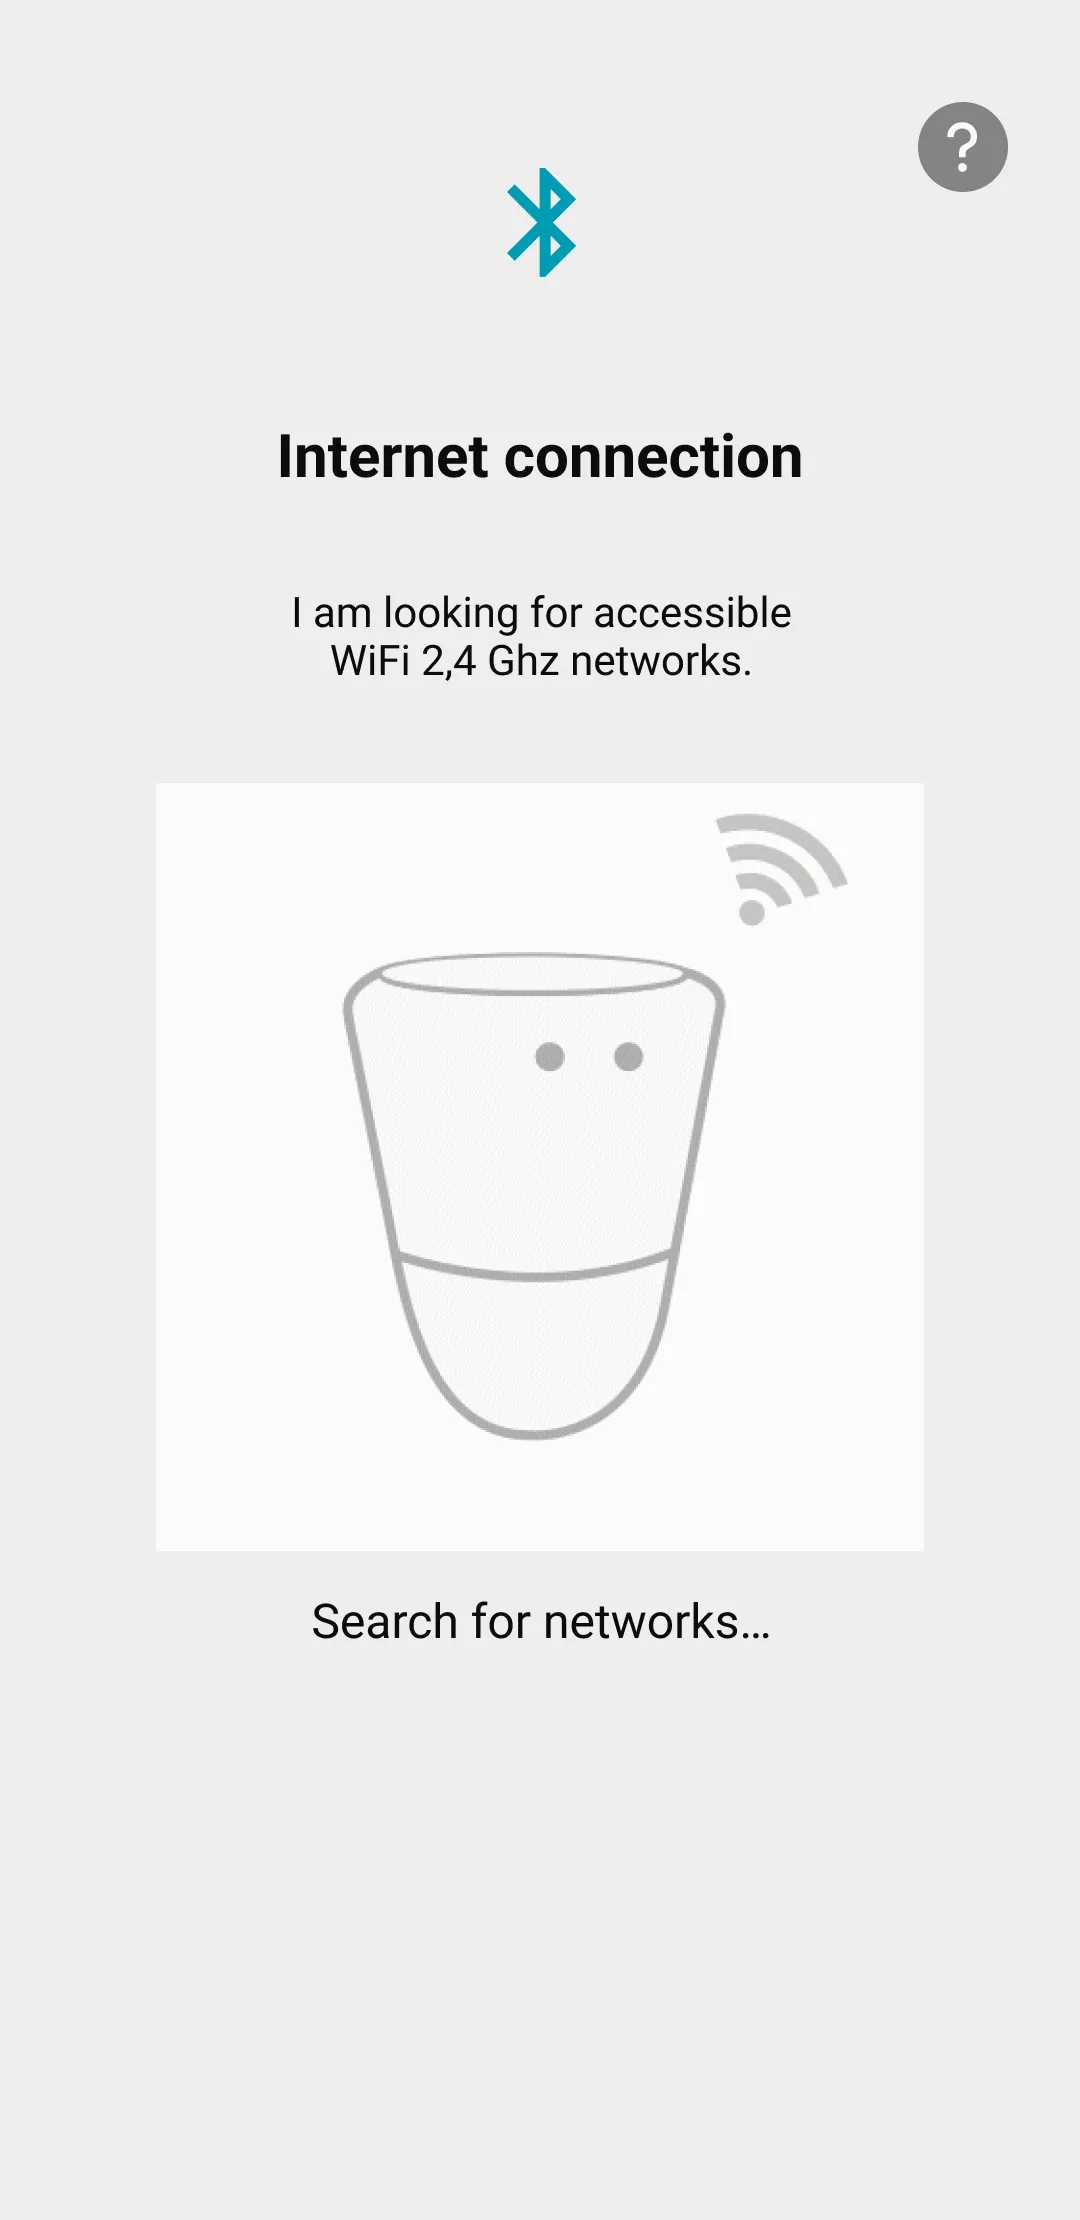 ICO is looking for accessible wifi networks